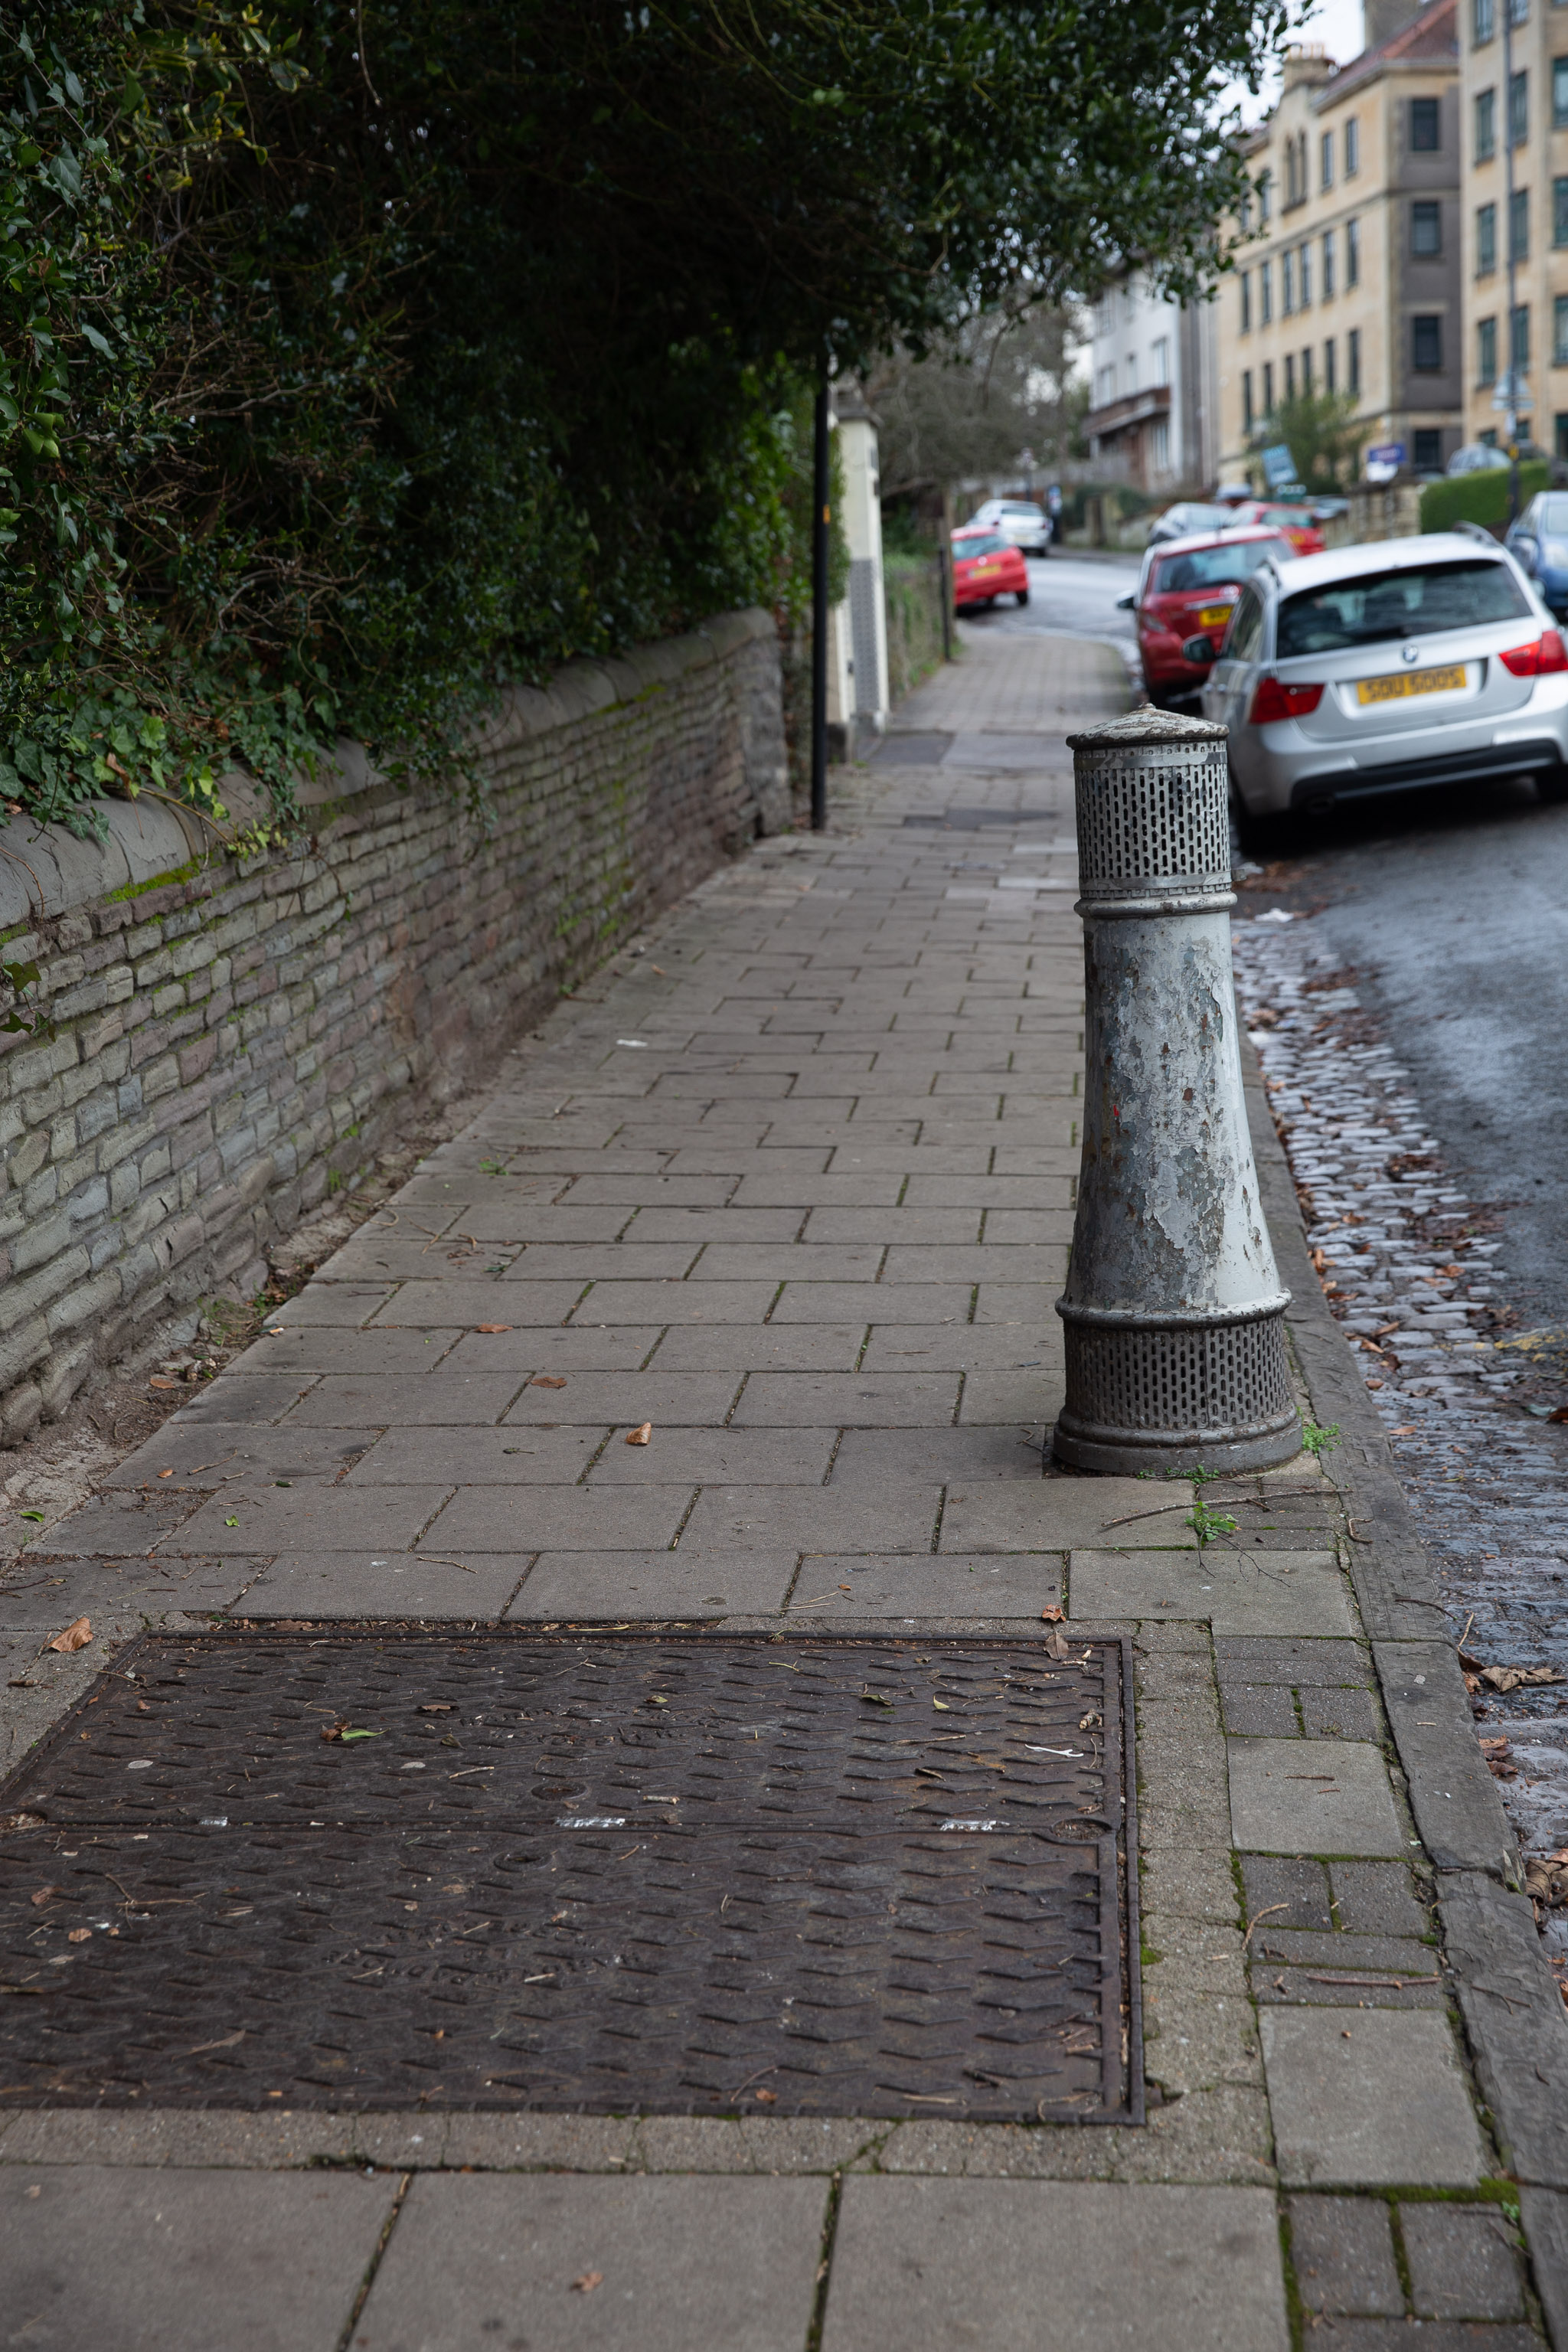 Substation
The pillar vents next to double-doored pavement covers are a dead giveaway. Many of Bristol's electrical substations are hidden underground like th...